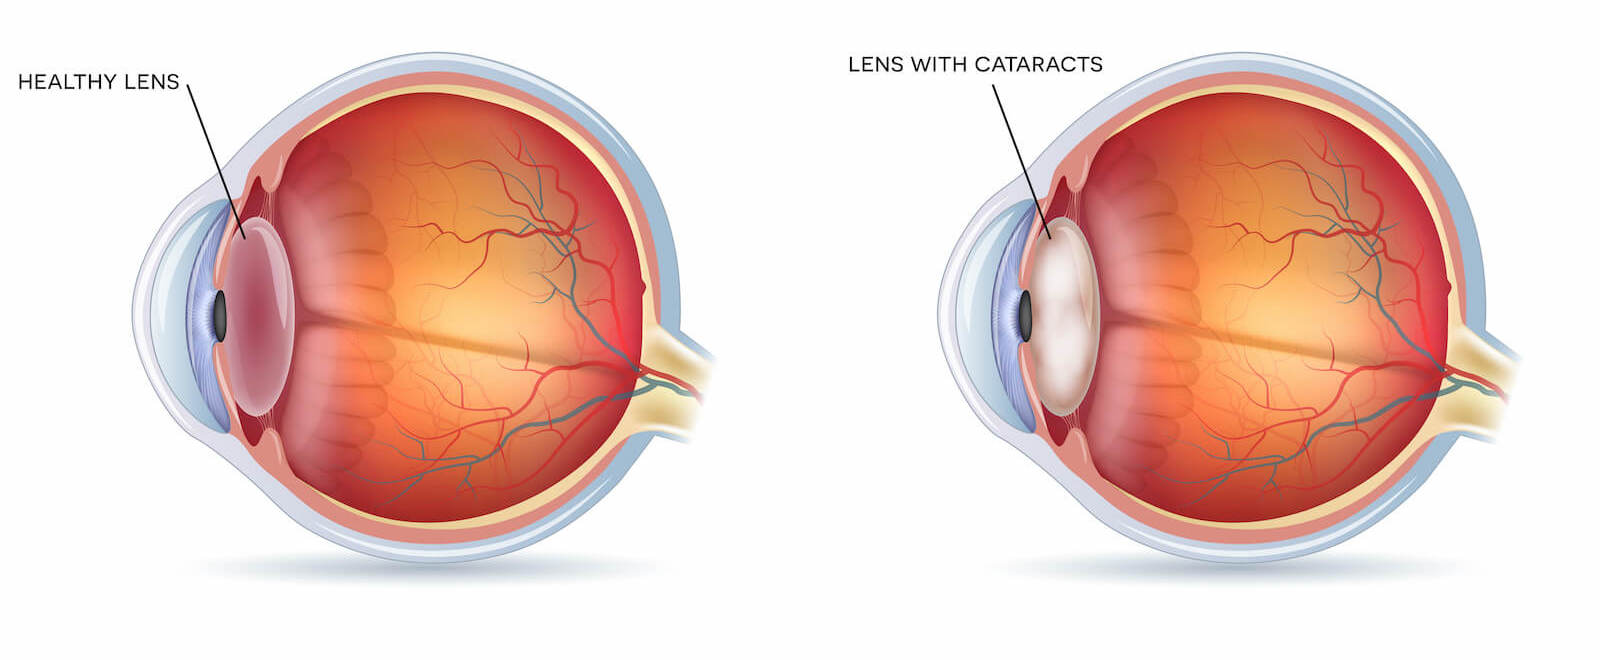 Diagram showing a healthy lens vs a lens with cataracts.